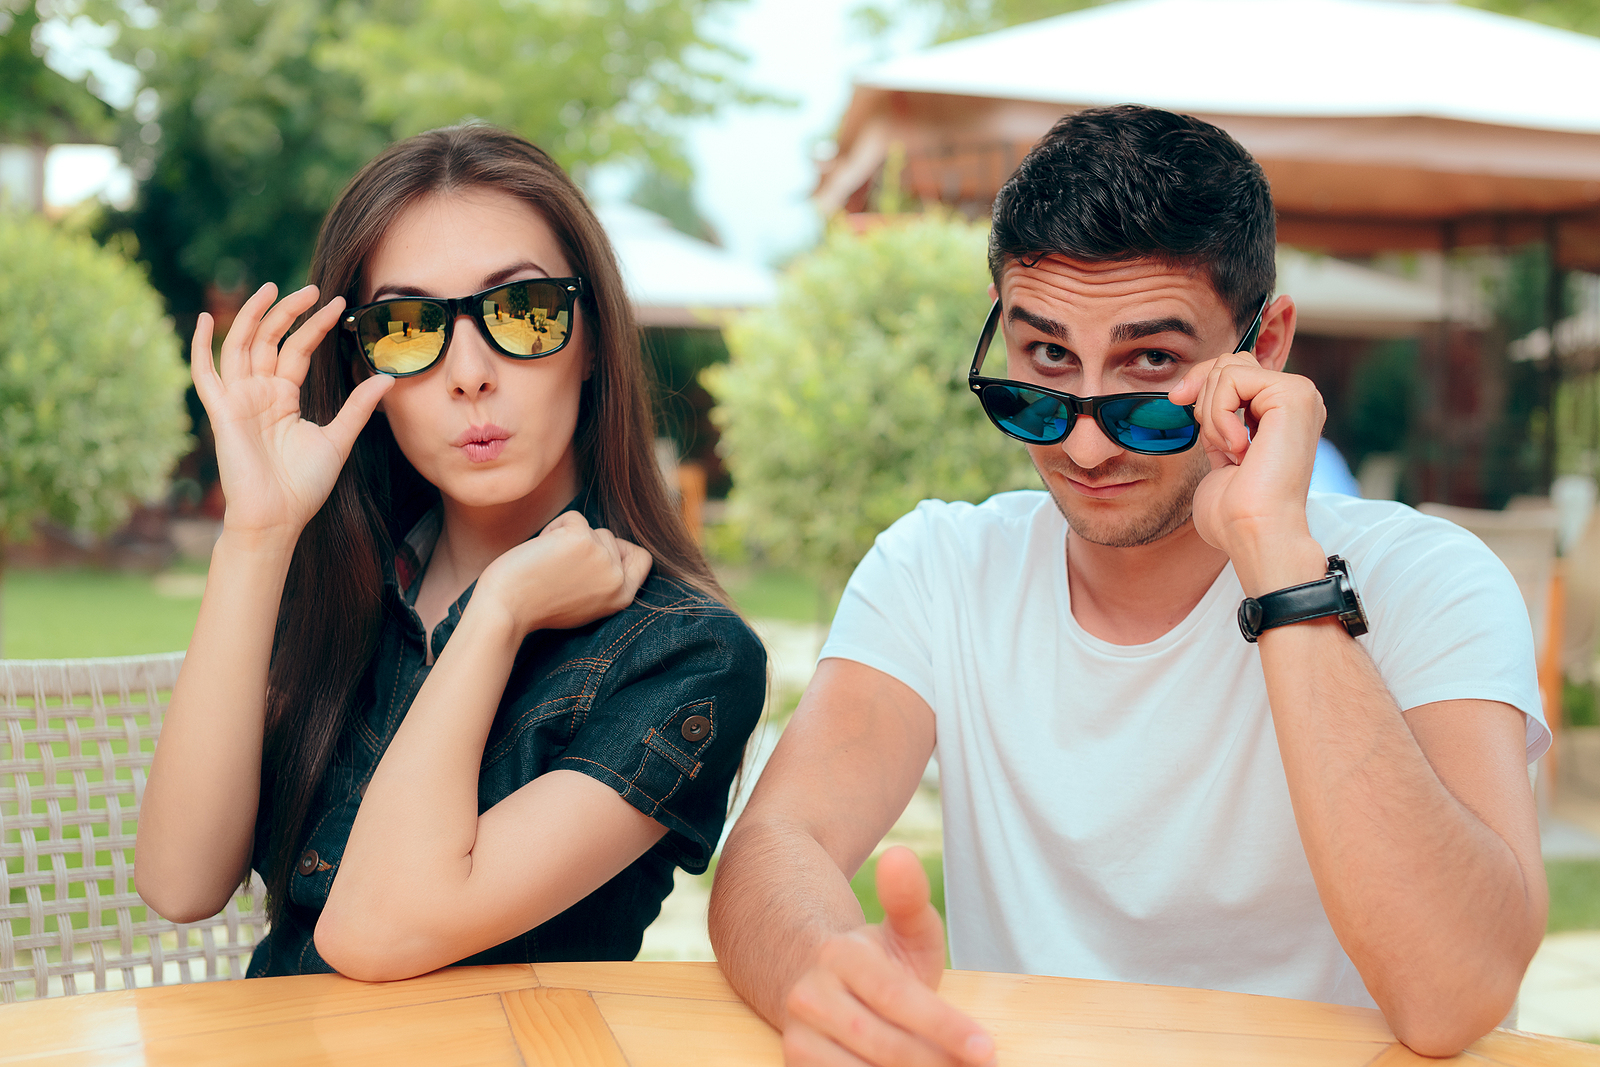 An attractive man and woman sitting together with sunglasses and a judgy expression on their faces looking at the camera.